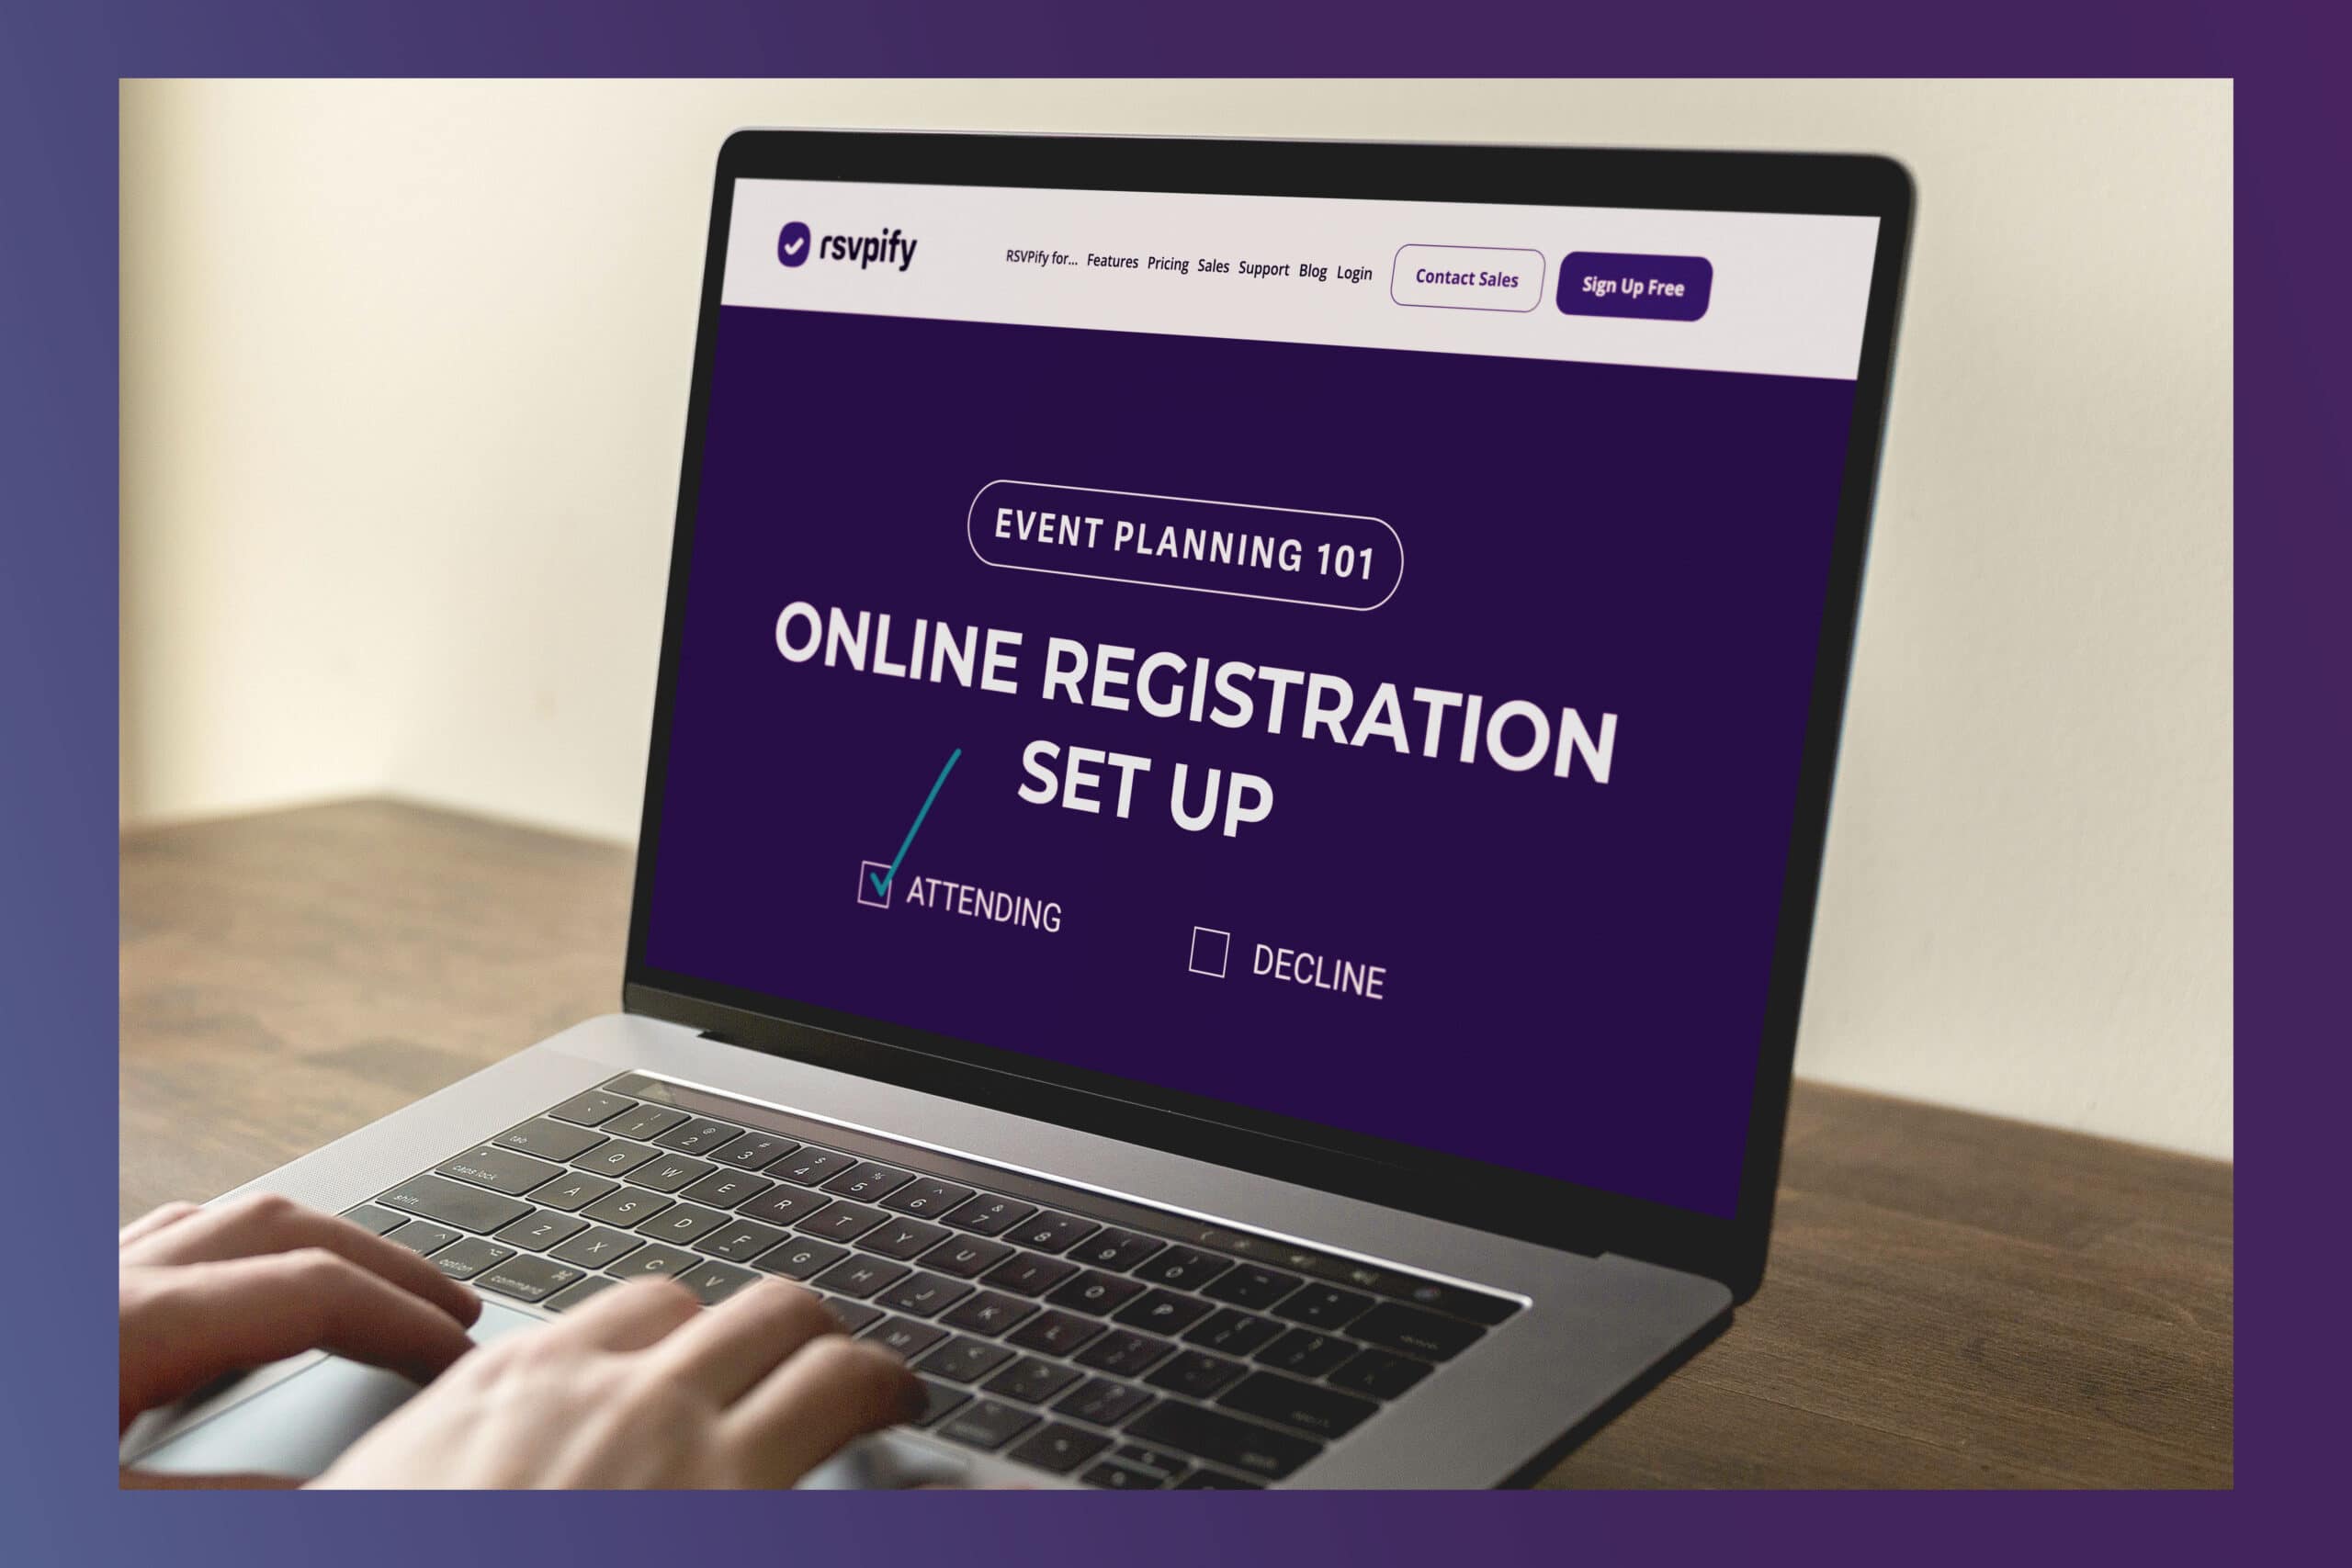 Learn how to set up online registration for an event